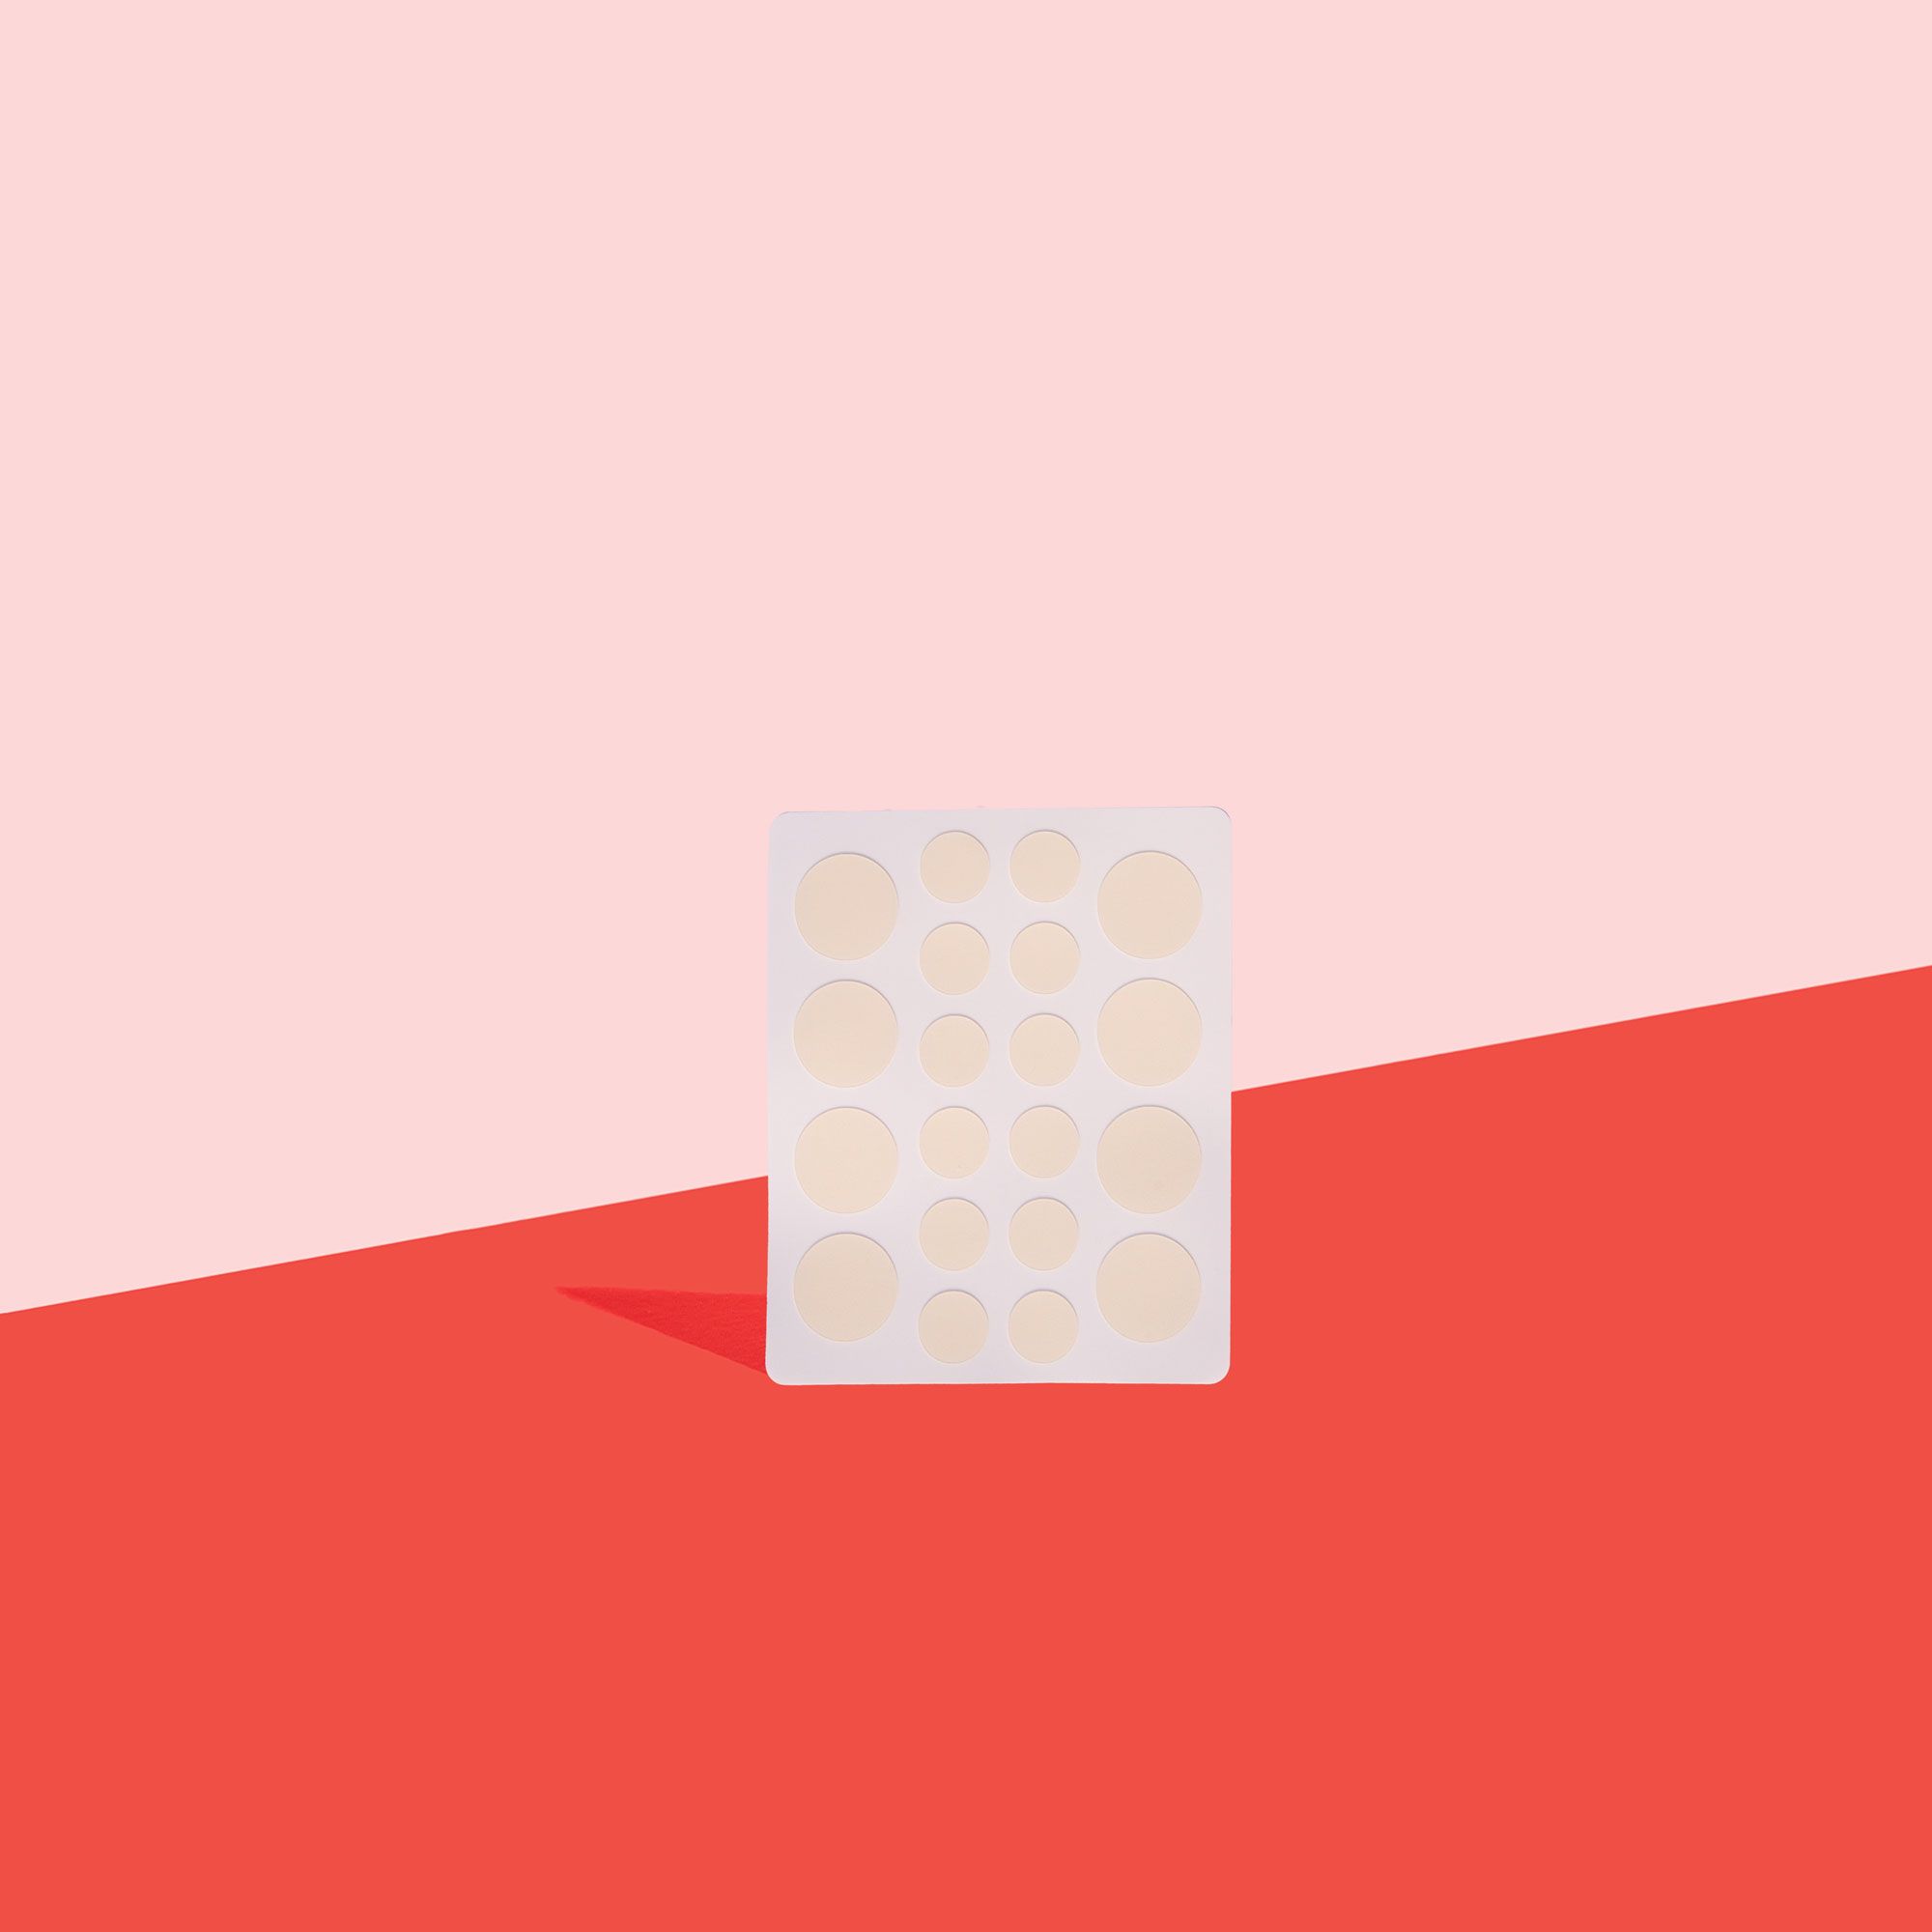 A sheet of 20 hydrocolloid patches in two sizes on a red surface with a pink background